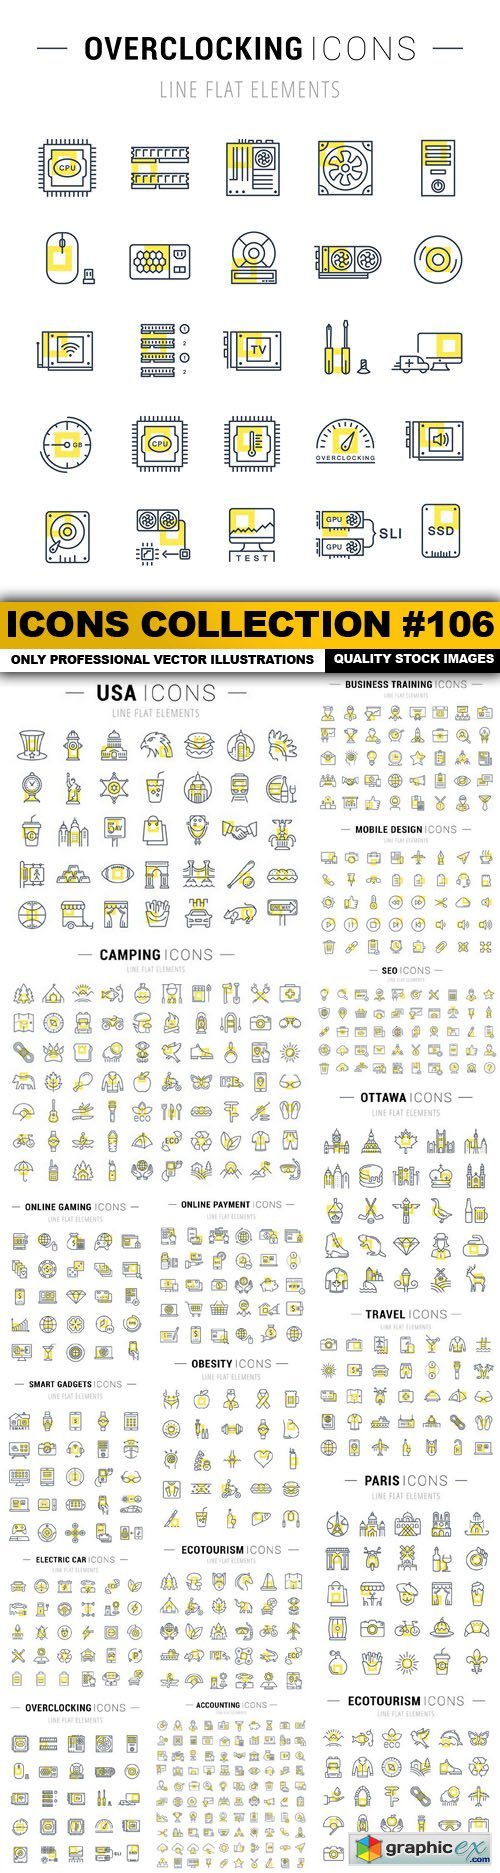 Icons Collection #106 - 20 Vector